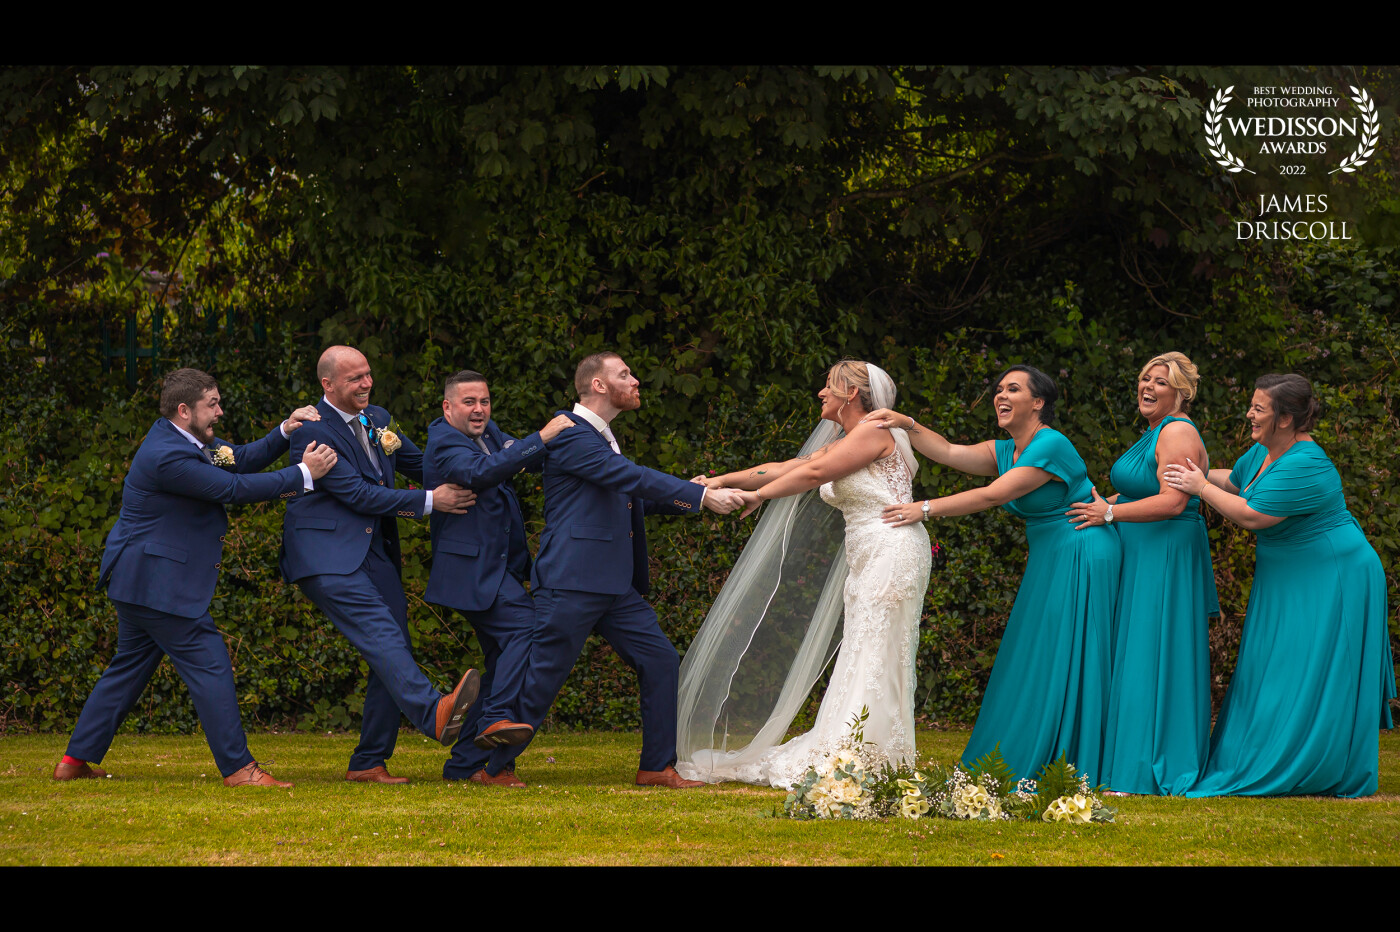 Shonagh and James tied the knot at Sliversprings cork, From the moment i met this couple and their bridal party, i knew that we would have such fun creating images.